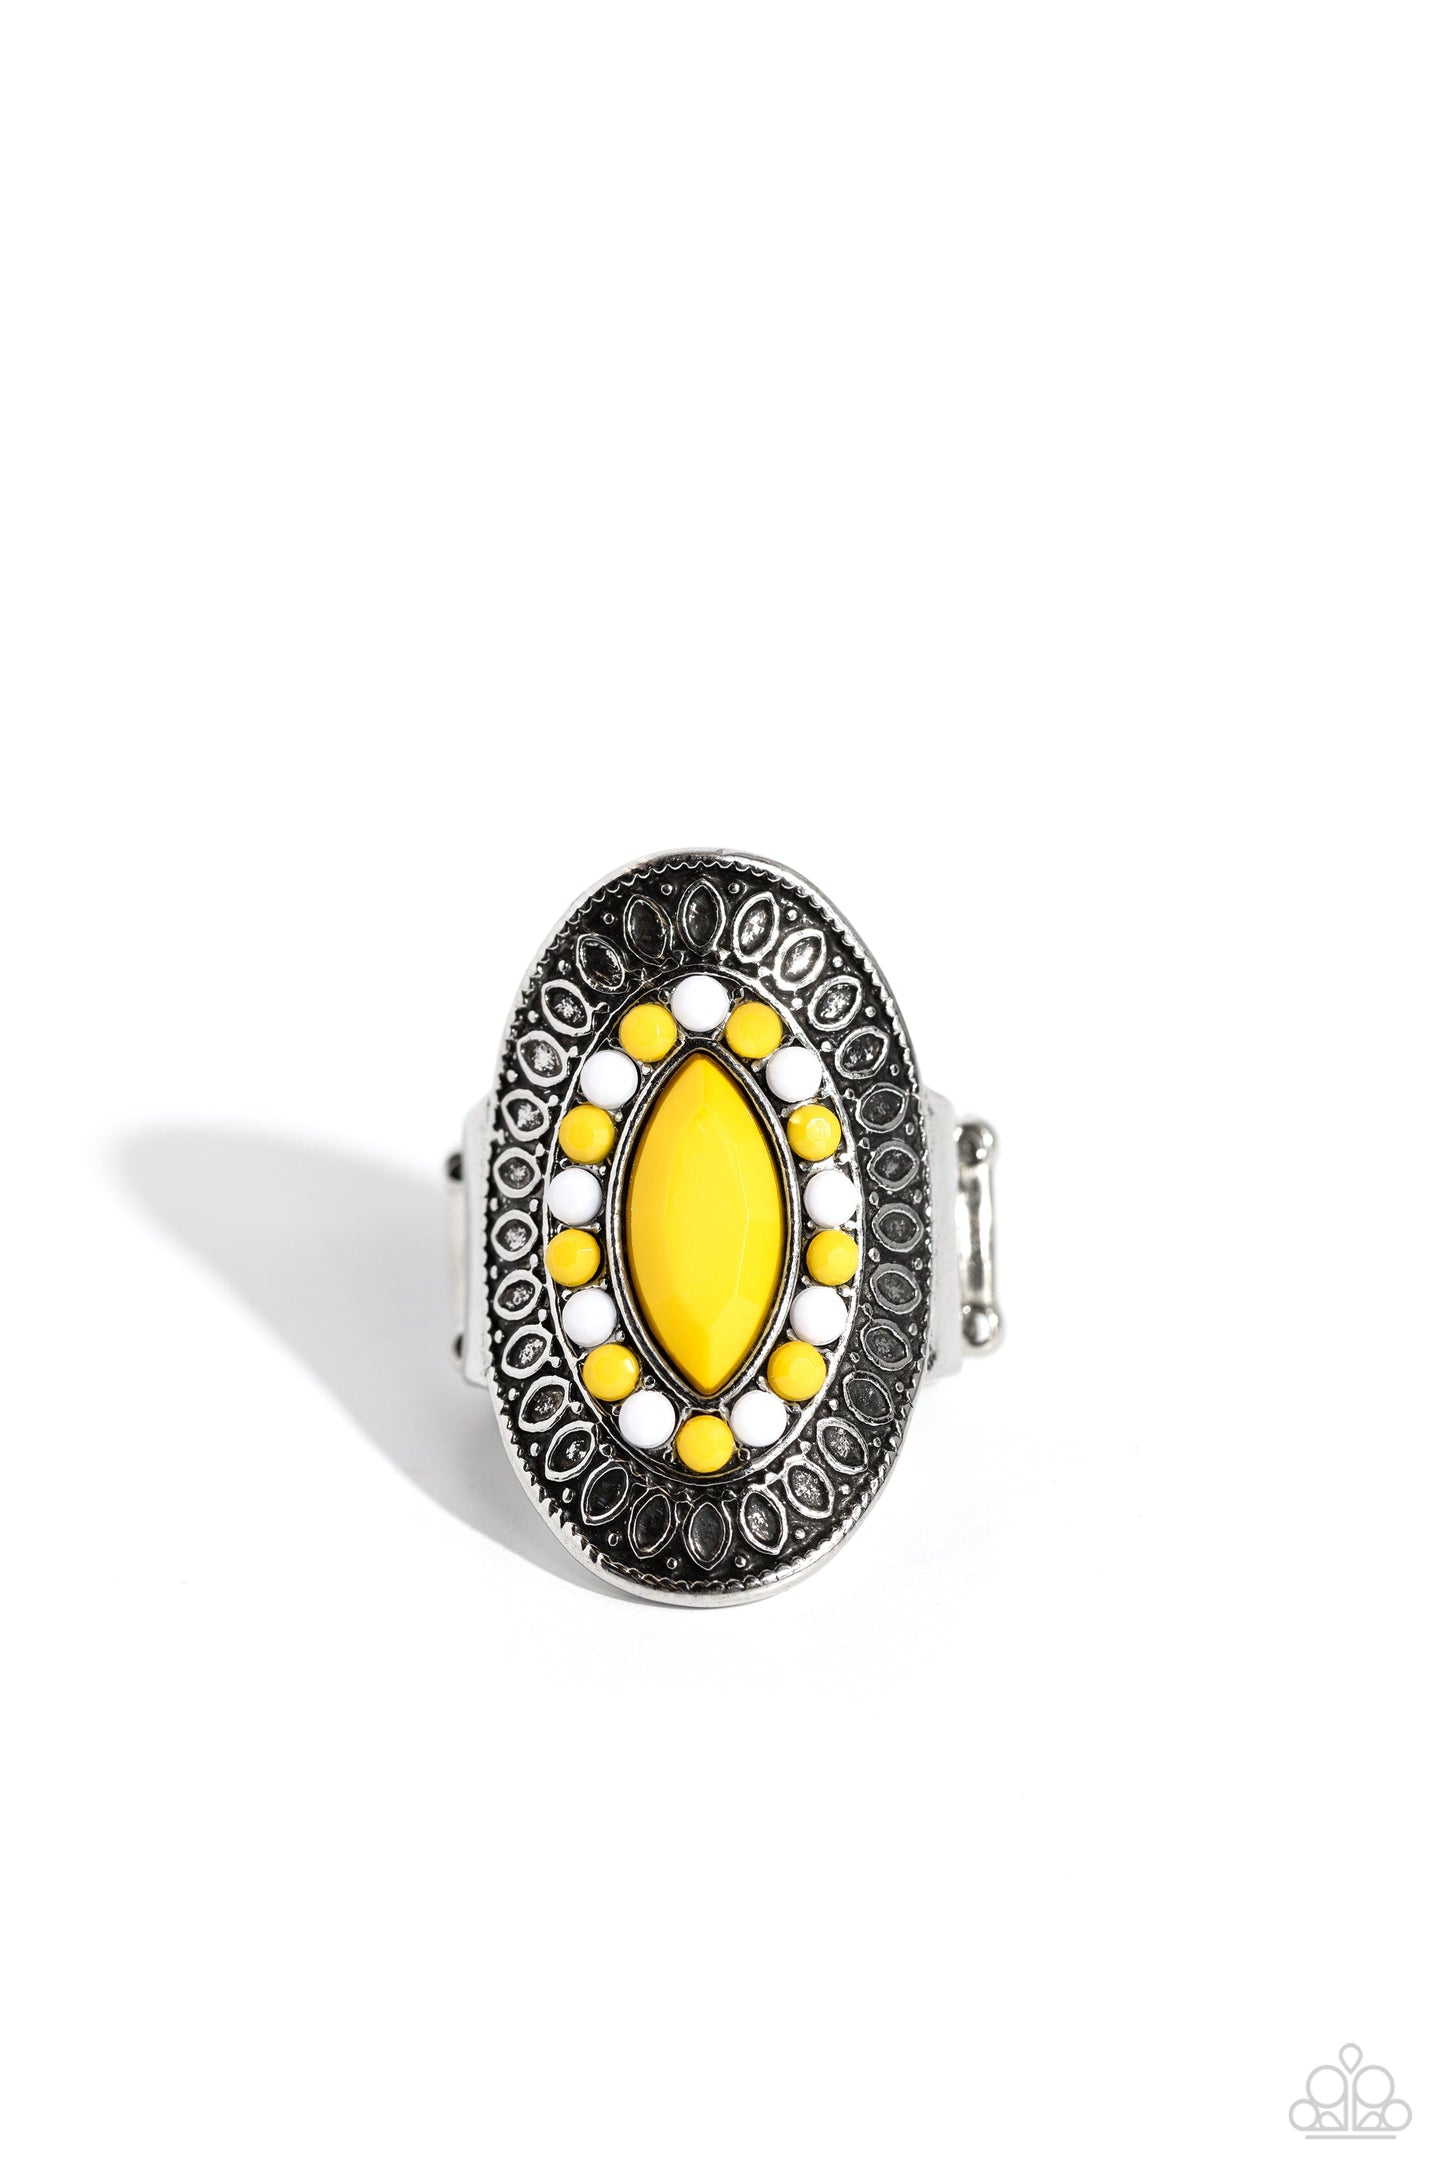 ARTISAN Expression - Yellow and Silver Ring - Paparazzi Accessories - Dainty Samoan Sun and white beads encircle an oversized marquise-cut Samoan Sun bead inside a border of silver petals, resulting in a seasonal pop of color atop the finger.